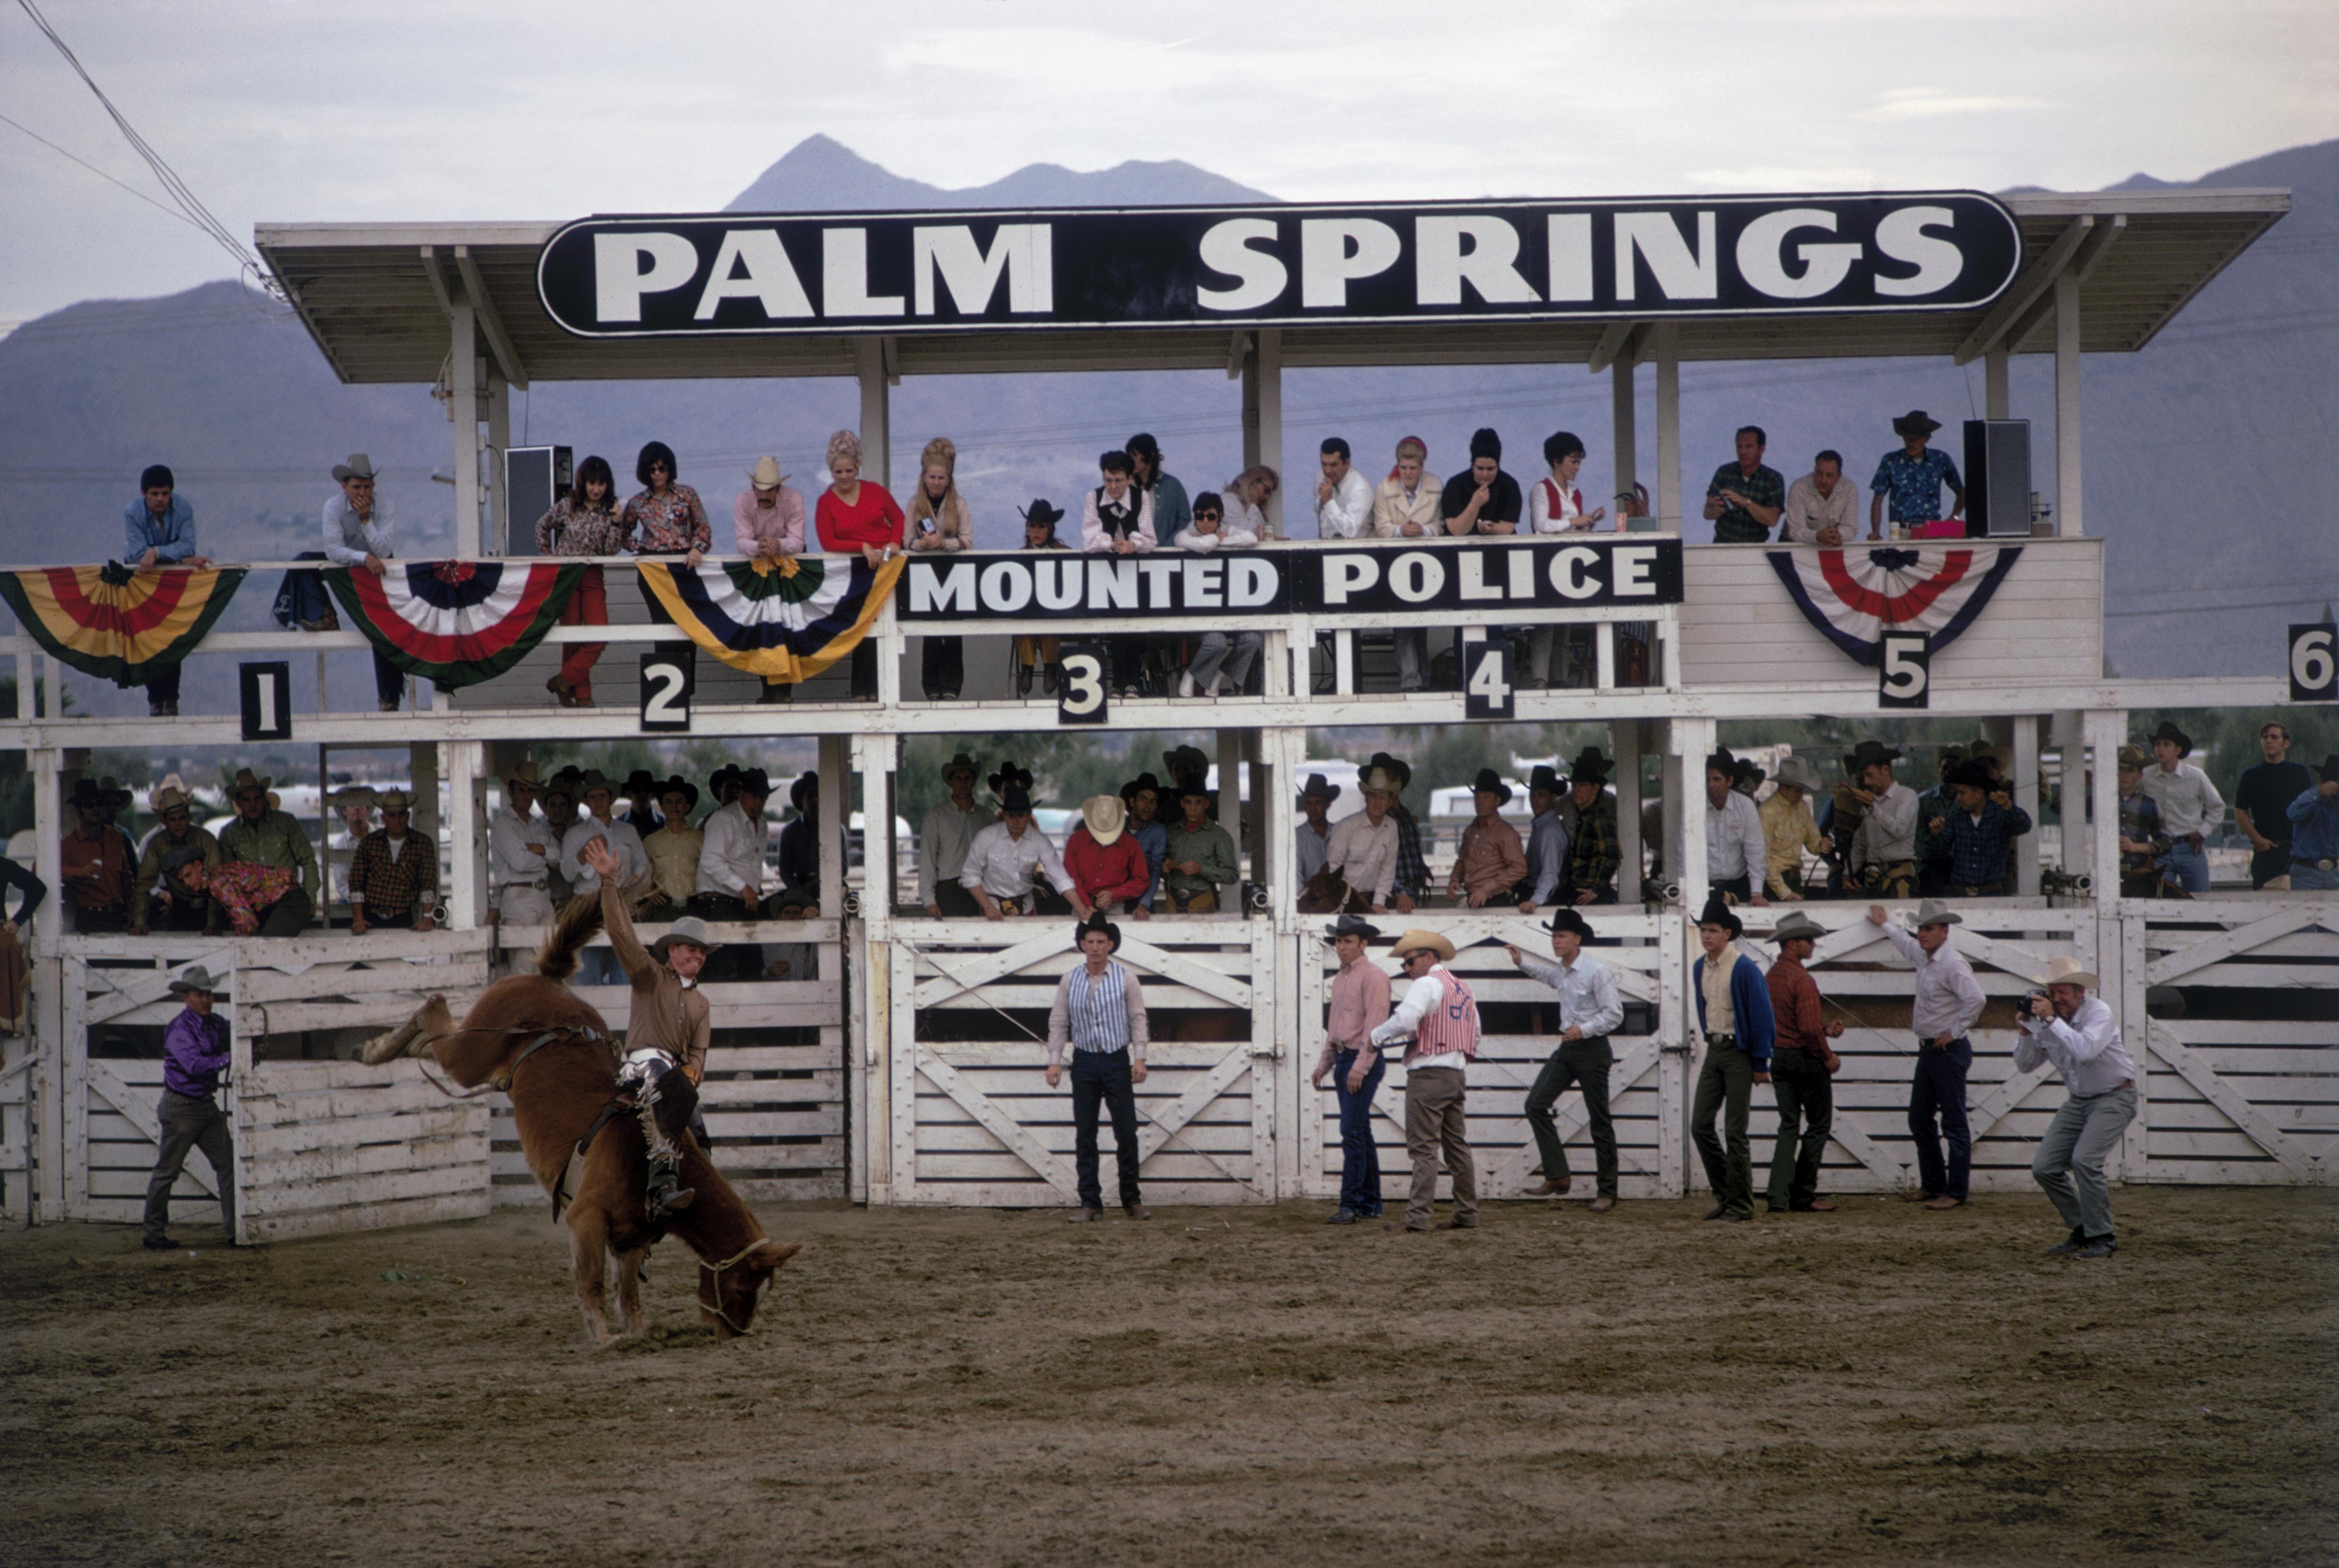 'Palm Springs Rodeo' 1970 Slim Aarons Limited Estate Edition Print 

Spectators watch from the stand as a contestant rides a bucking horse at the Palm Springs Mounted Police Rodeo, Palm Springs, California, January 1970. 
3(Photo by Slim